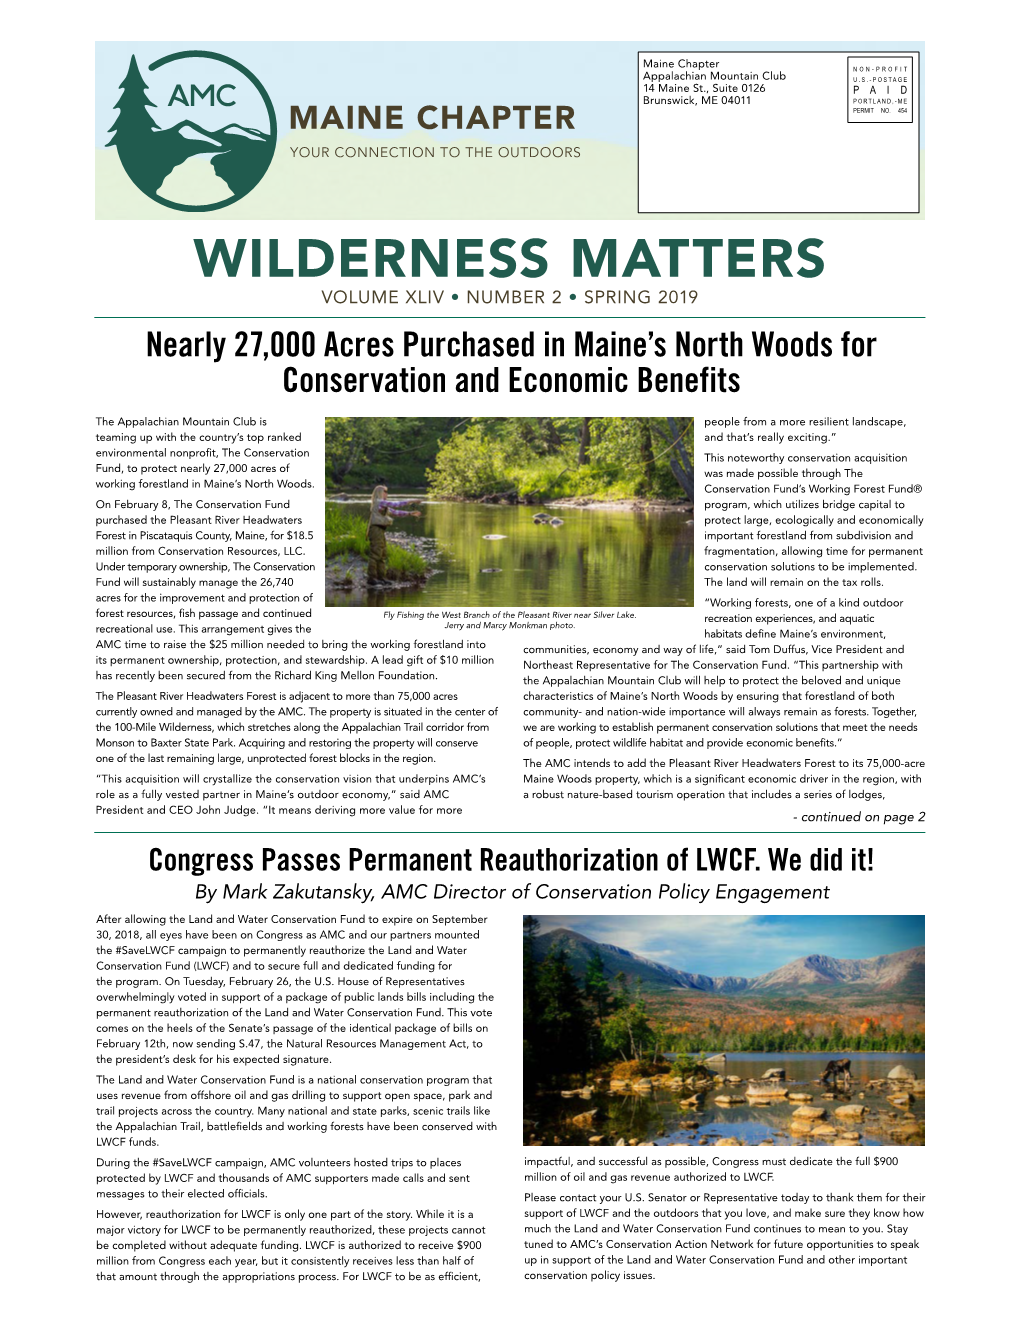 SPRING 2019 Nearly 27,000 Acres Purchased in Maine’S North Woods for Conservation and Economic Benefits